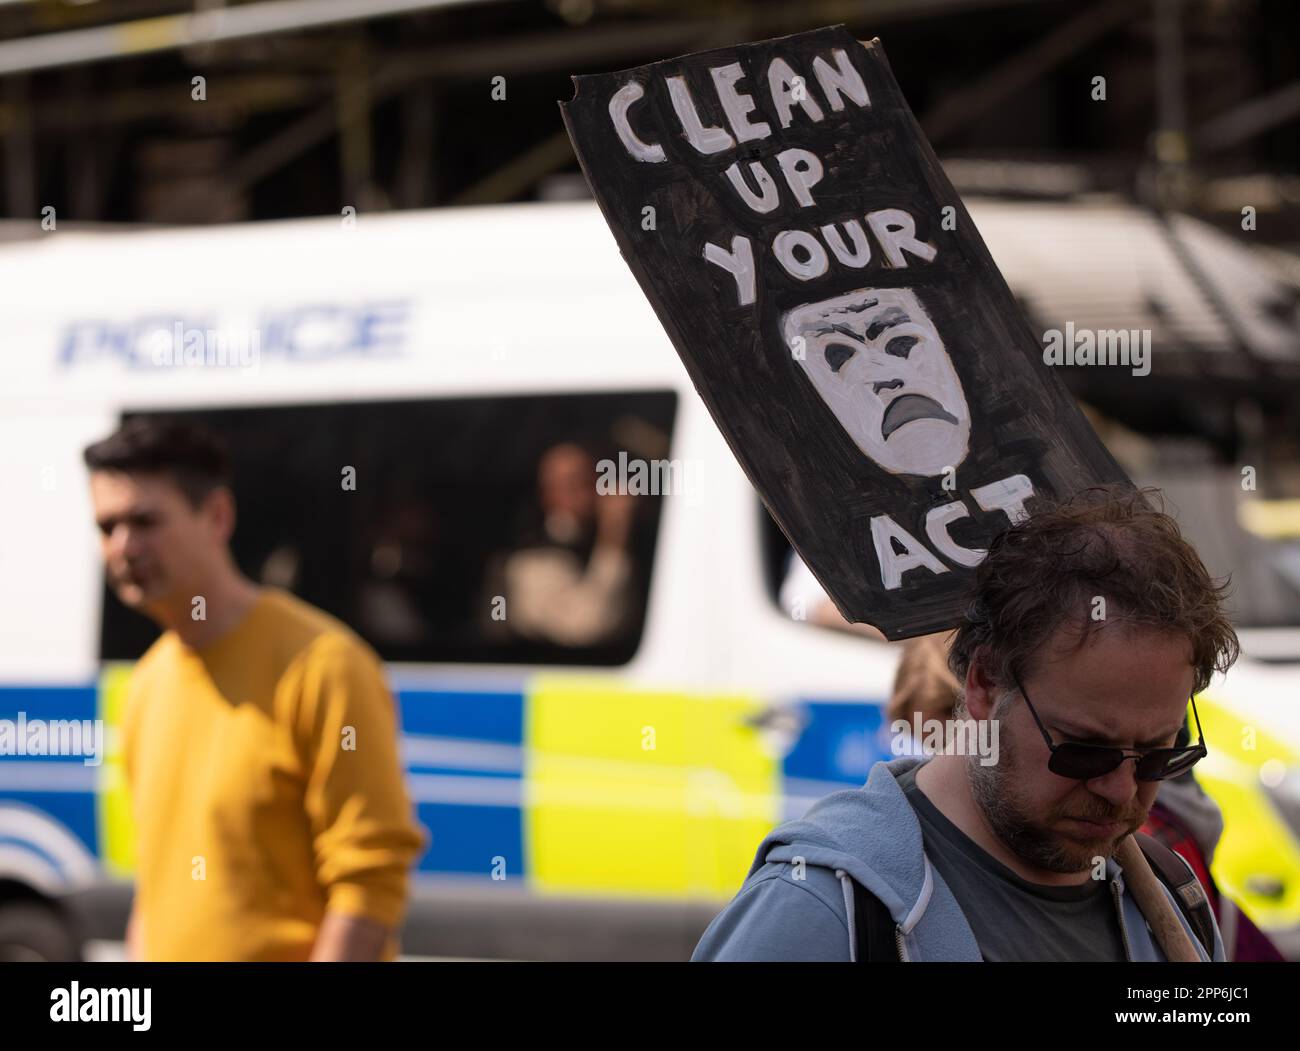 Clean up your act sign at Extinction Rebellion, The Big one, day 2 ,( saturday). Involved the 'Big One march for biodiversity'which ended with a 'die in'. Members of the 'Red Rebel Brigade 'and 'Green spirits' attended, London United KIngdom Picture garyroberts/worldwidefeatures.com Stock Photo